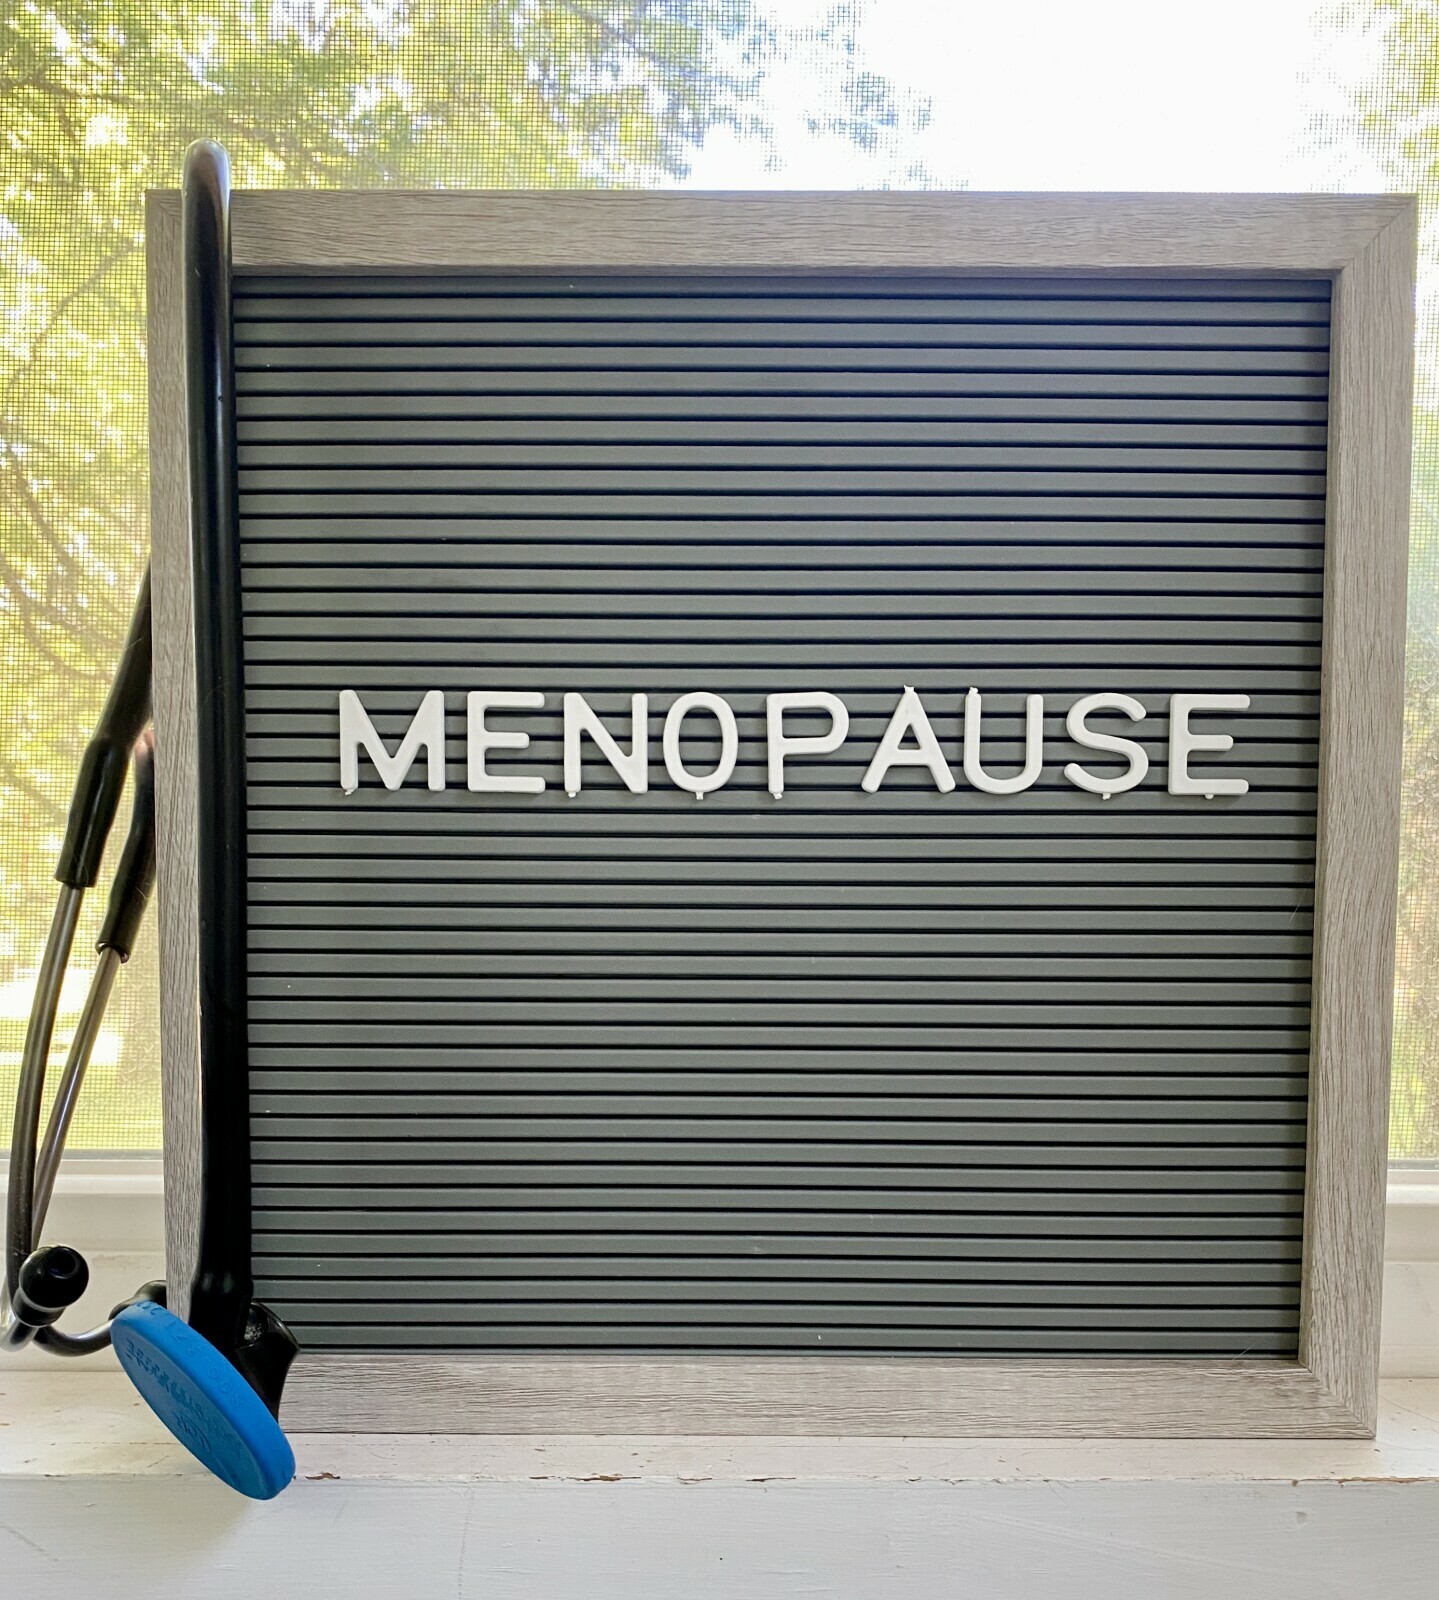 Menopause Got You Down?